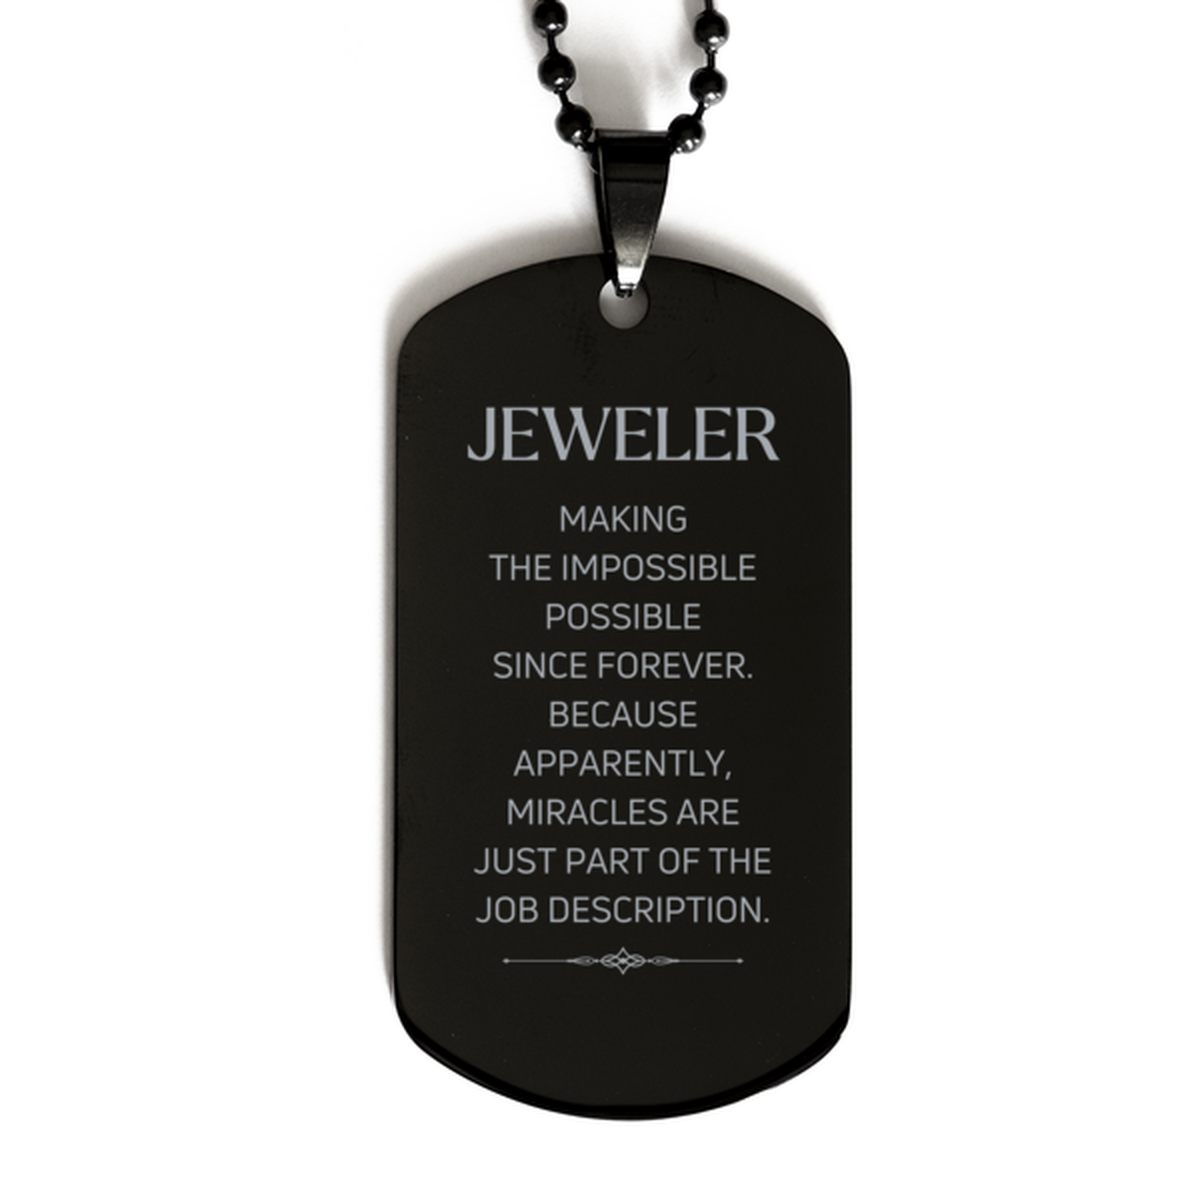 Funny Jeweler Gifts, Miracles are just part of the job description, Inspirational Birthday Black Dog Tag For Jeweler, Men, Women, Coworkers, Friends, Boss